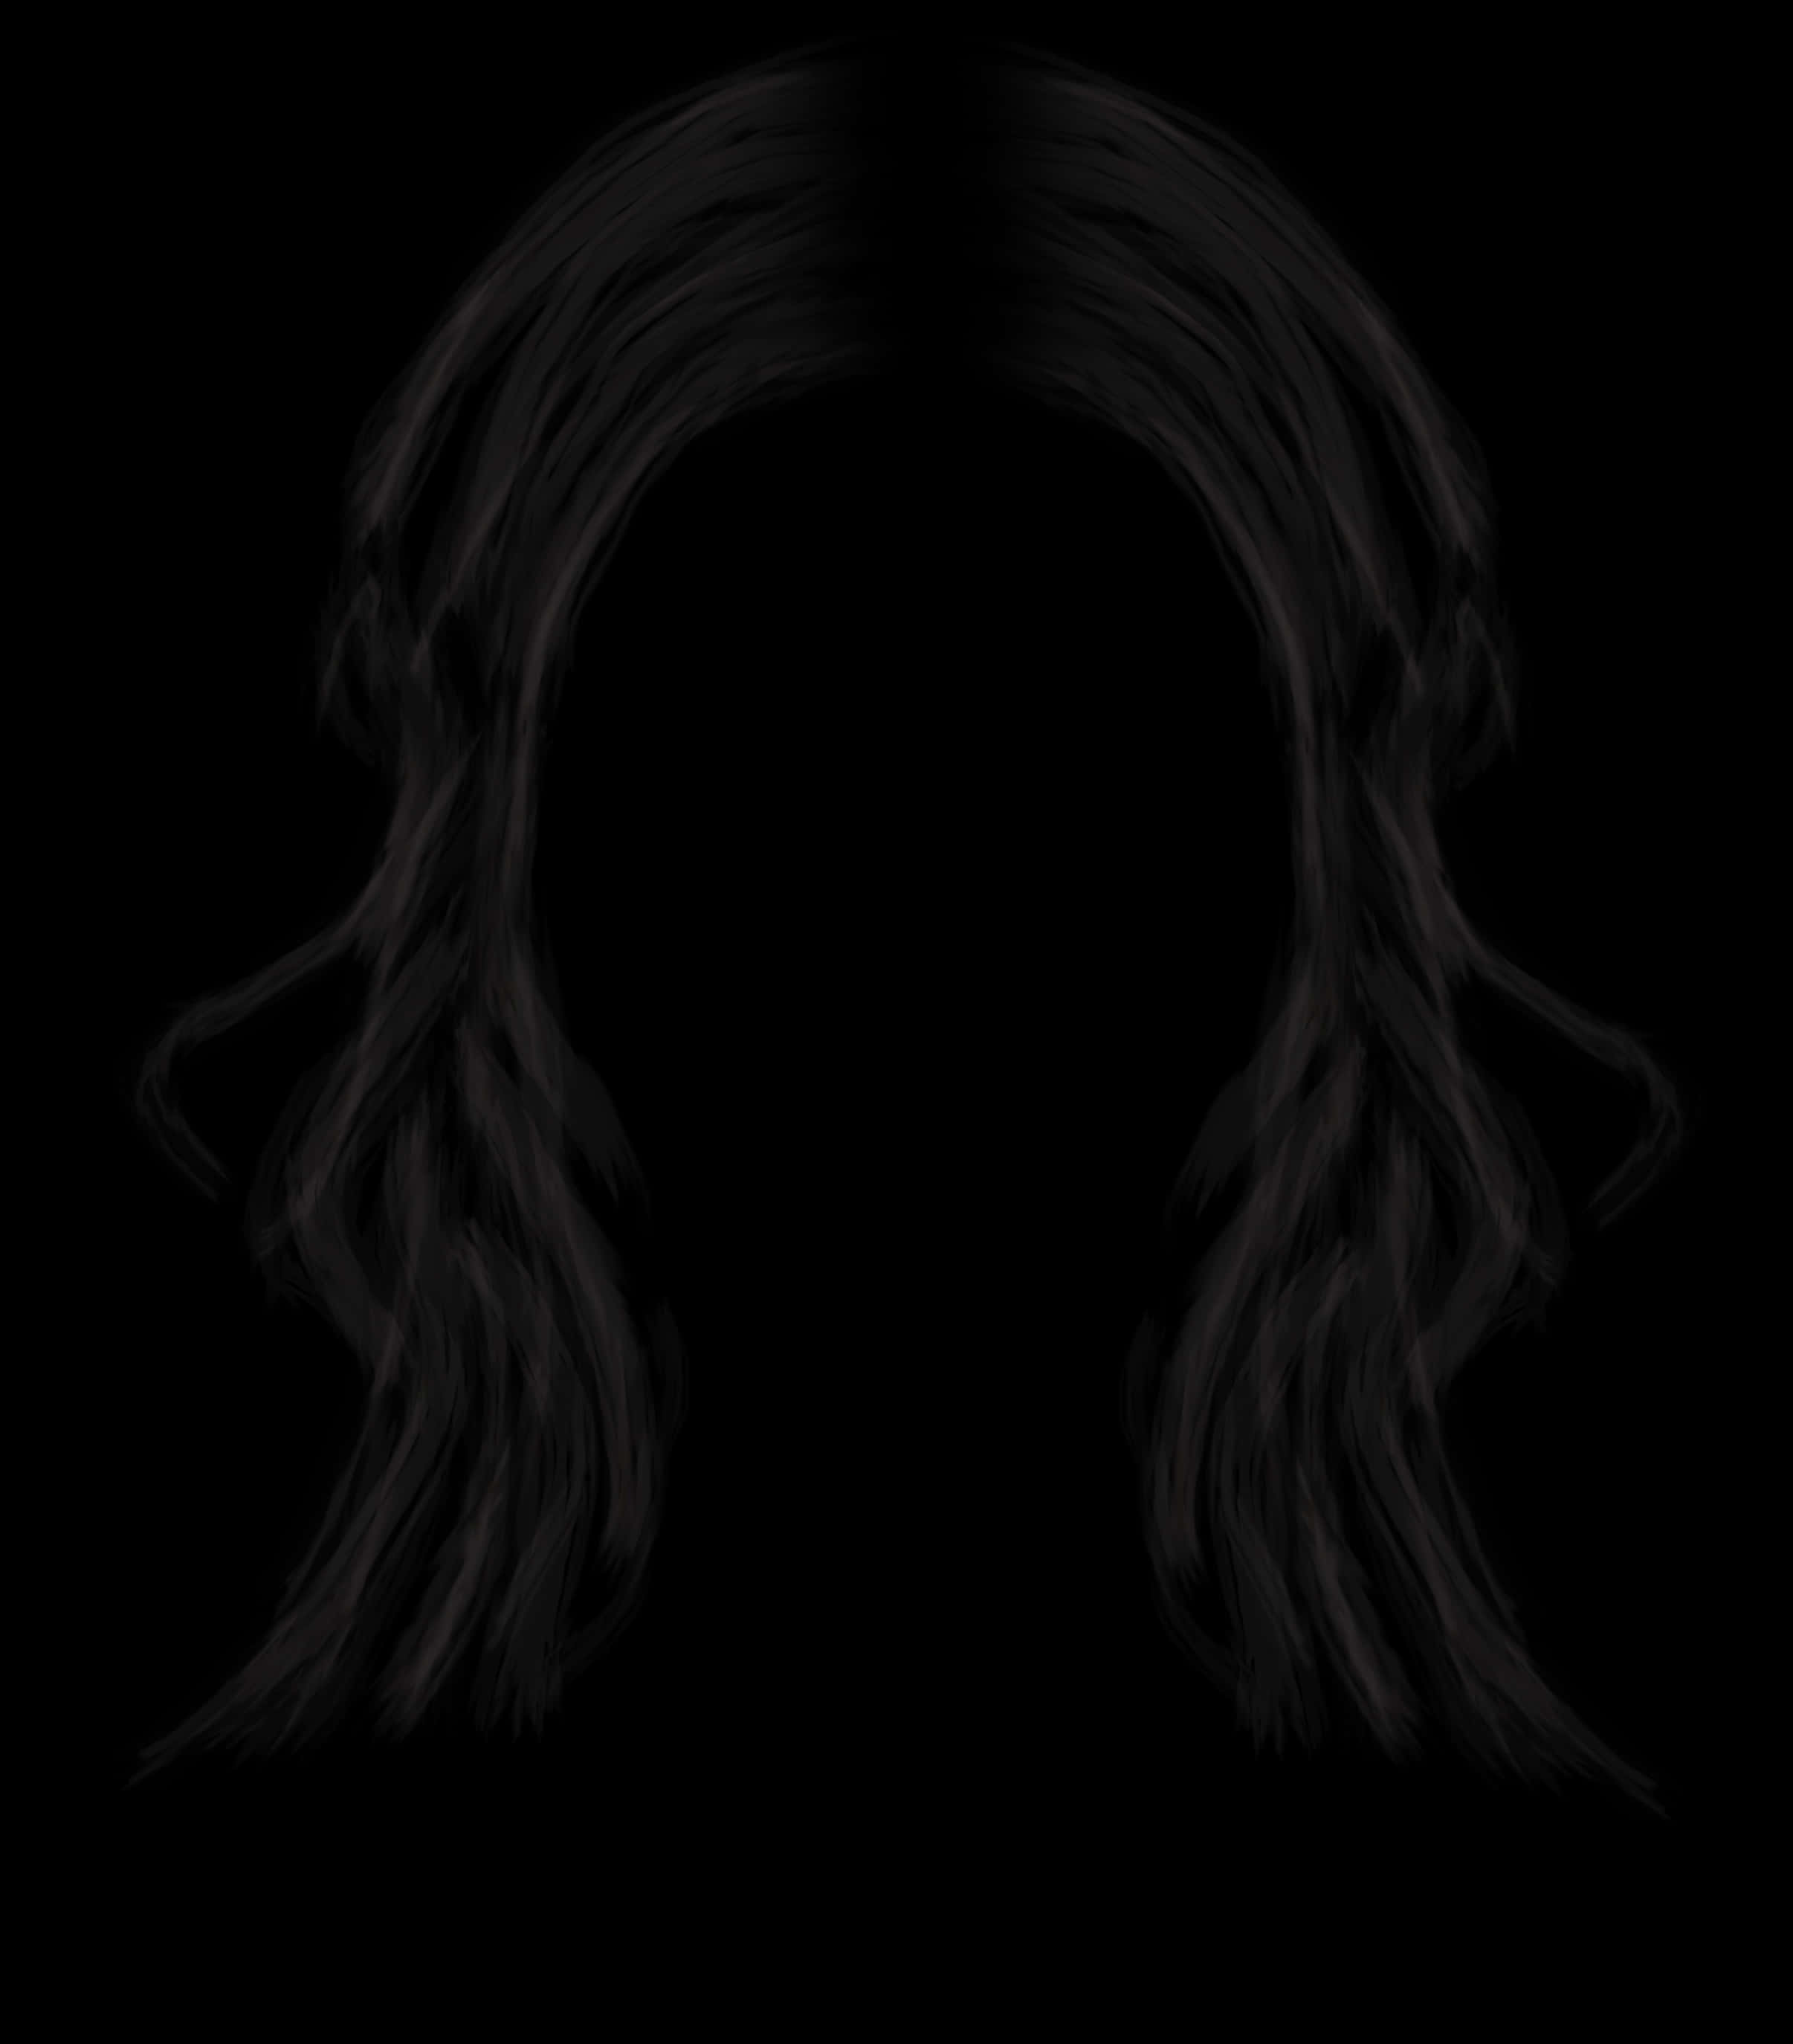 A Black Hair With A Black Background